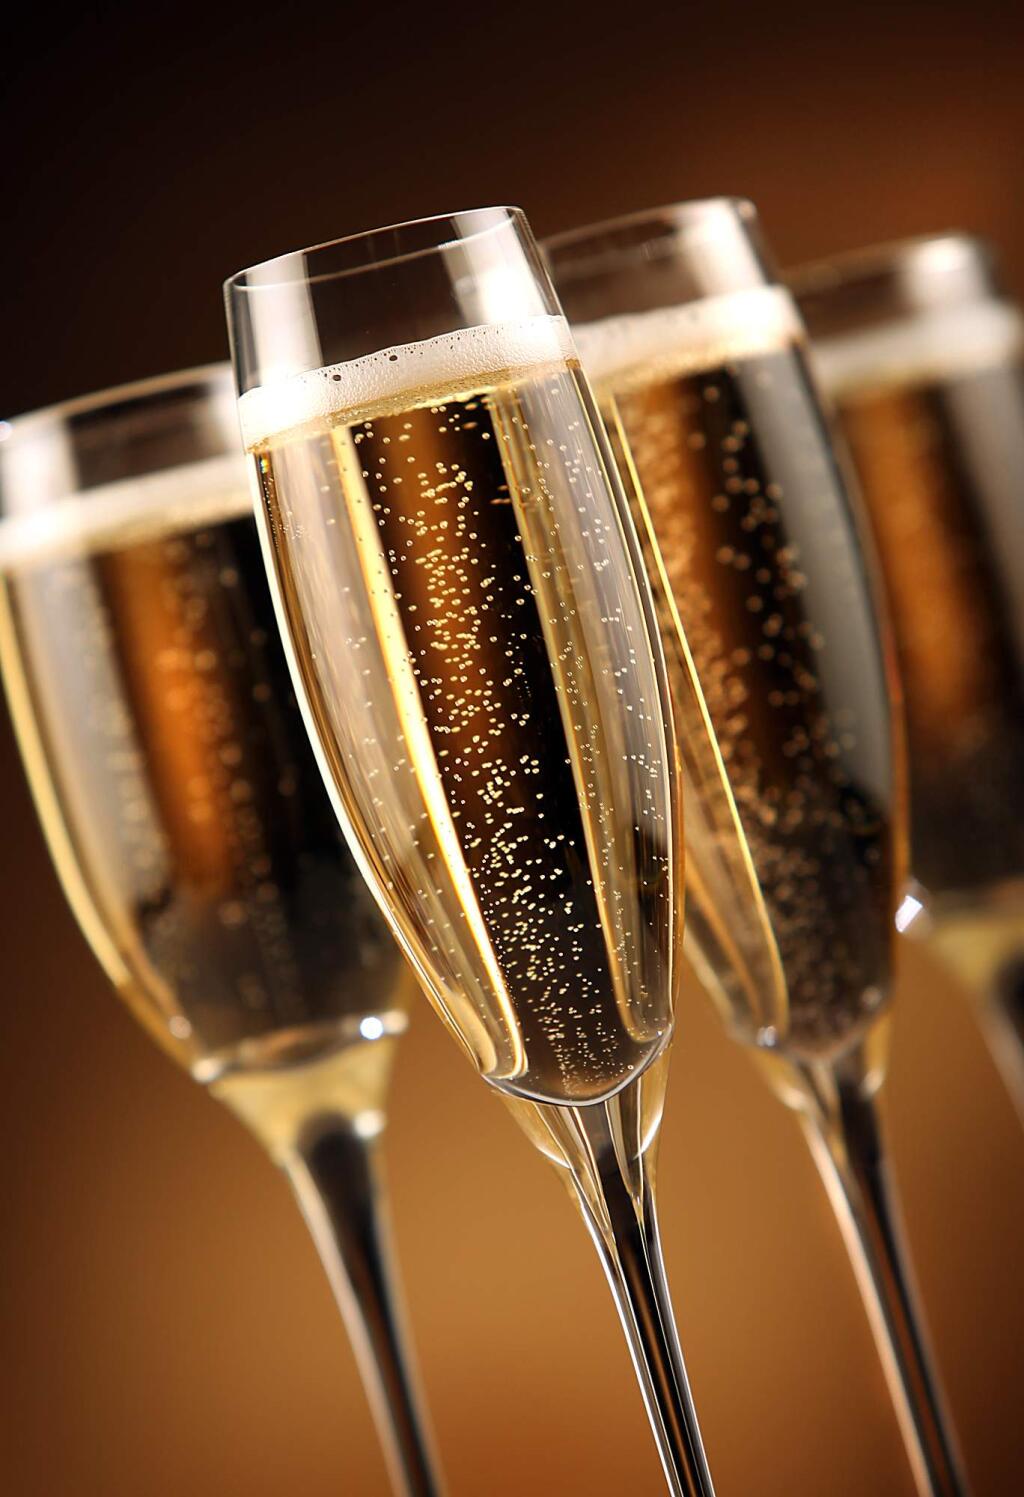 Wine writer Peg Melnik outlines everything to know about sparkling wine, including Champagne, for holiday parties.